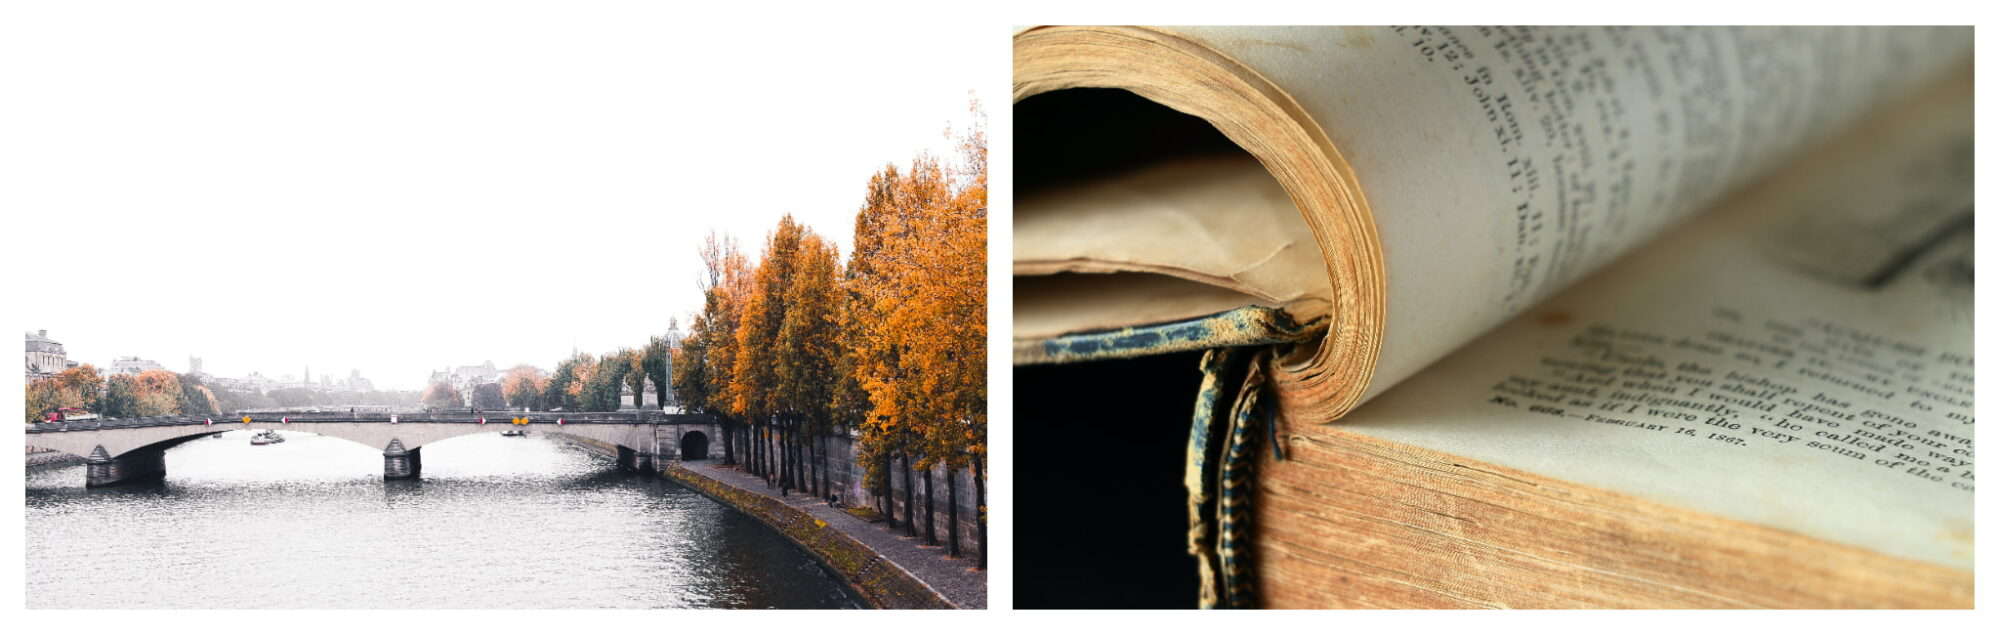 left: The Seine river in Paris; right: an old antique book opened to a page towards the end.